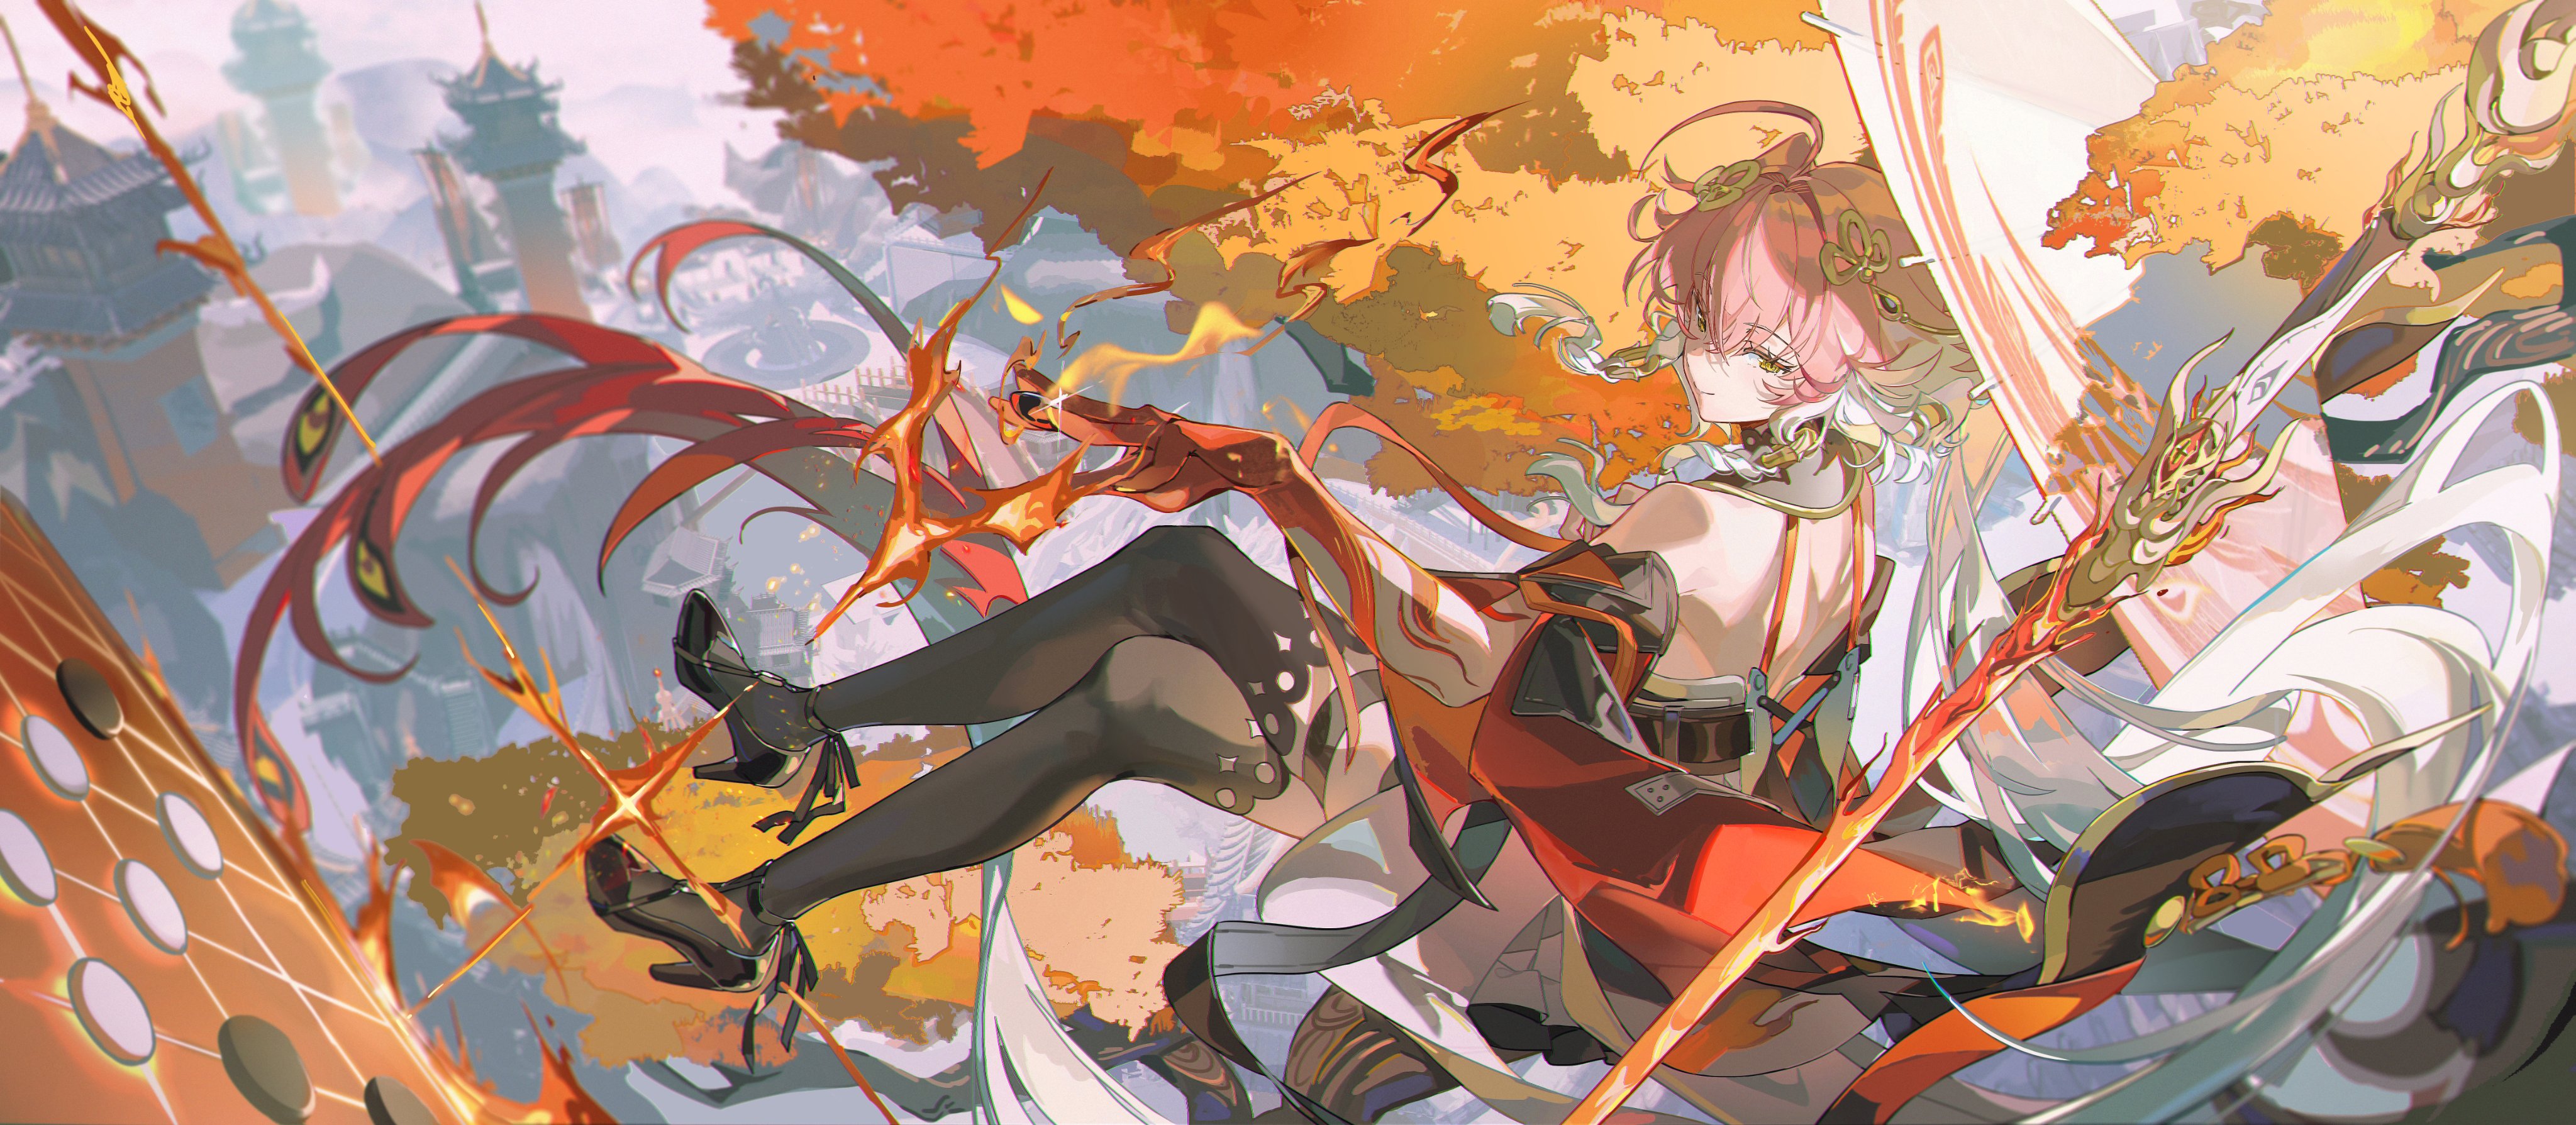 Wuthering Waves Changli Wuthering Waves Anime Girls Digital Art Video Game Art 4096x1789